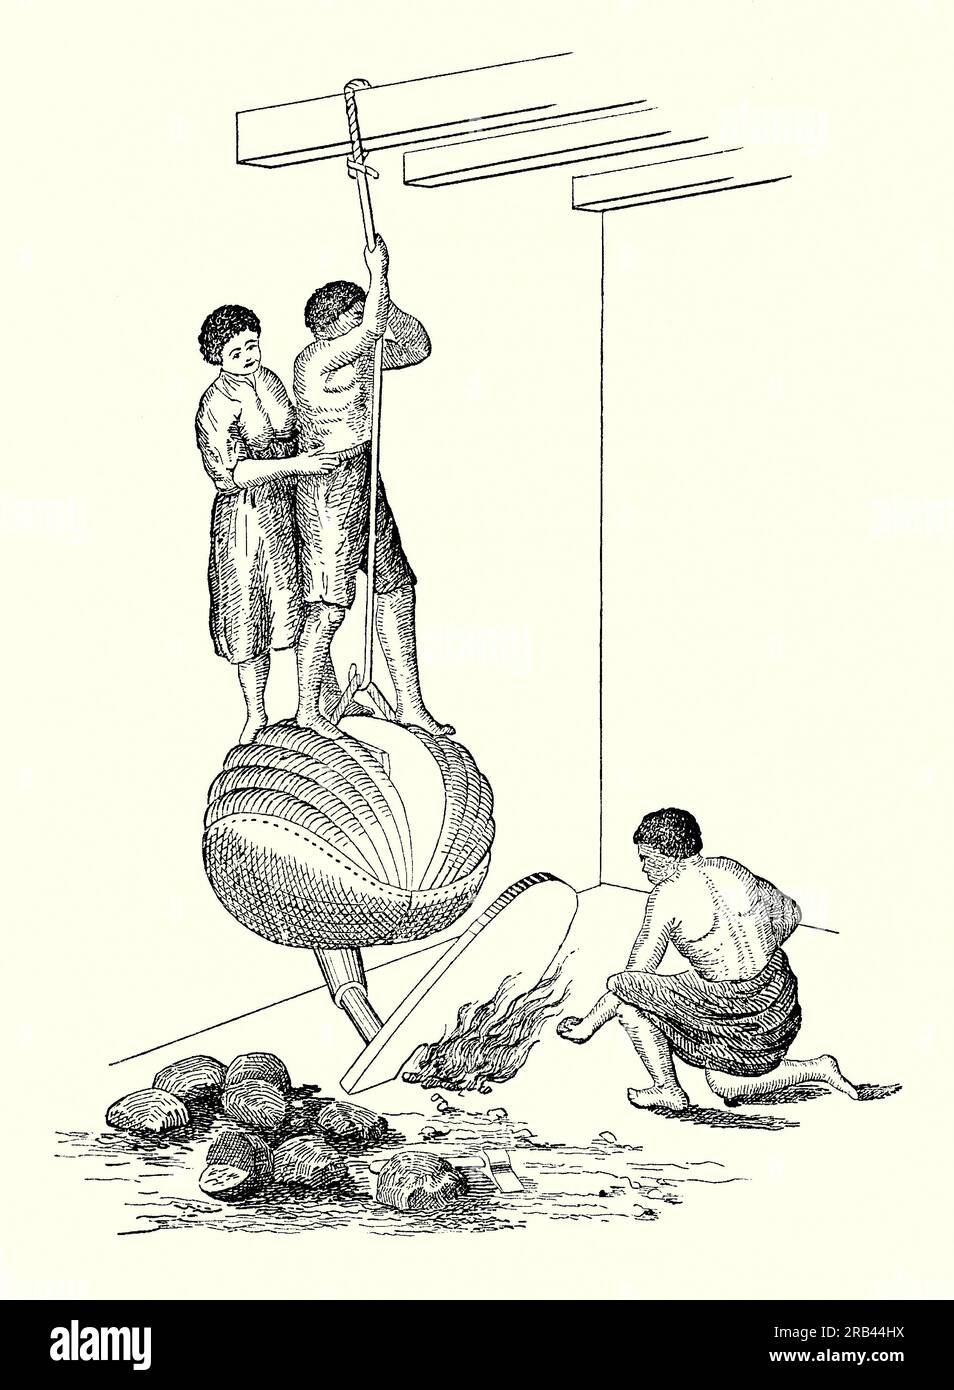 An old engraving of using ‘Nonkreem’ bellows in an early smelting foundry in northern India. It is from a Victorian mechanical engineering book of the 1880s. These bellows were used in smelting iron-containing sand over charcoal fires. The double-action bellows here are worked by a man and a woman standing on them. The flaps are raised by hand and expanded by using their feet. A tube made from bamboo concentrating the blasts of air from the bellows through a small hole cut in a piece of stone and on to the fire containing the sand for smelting. The resulting lumps of iron are seen bottom left. Stock Photo